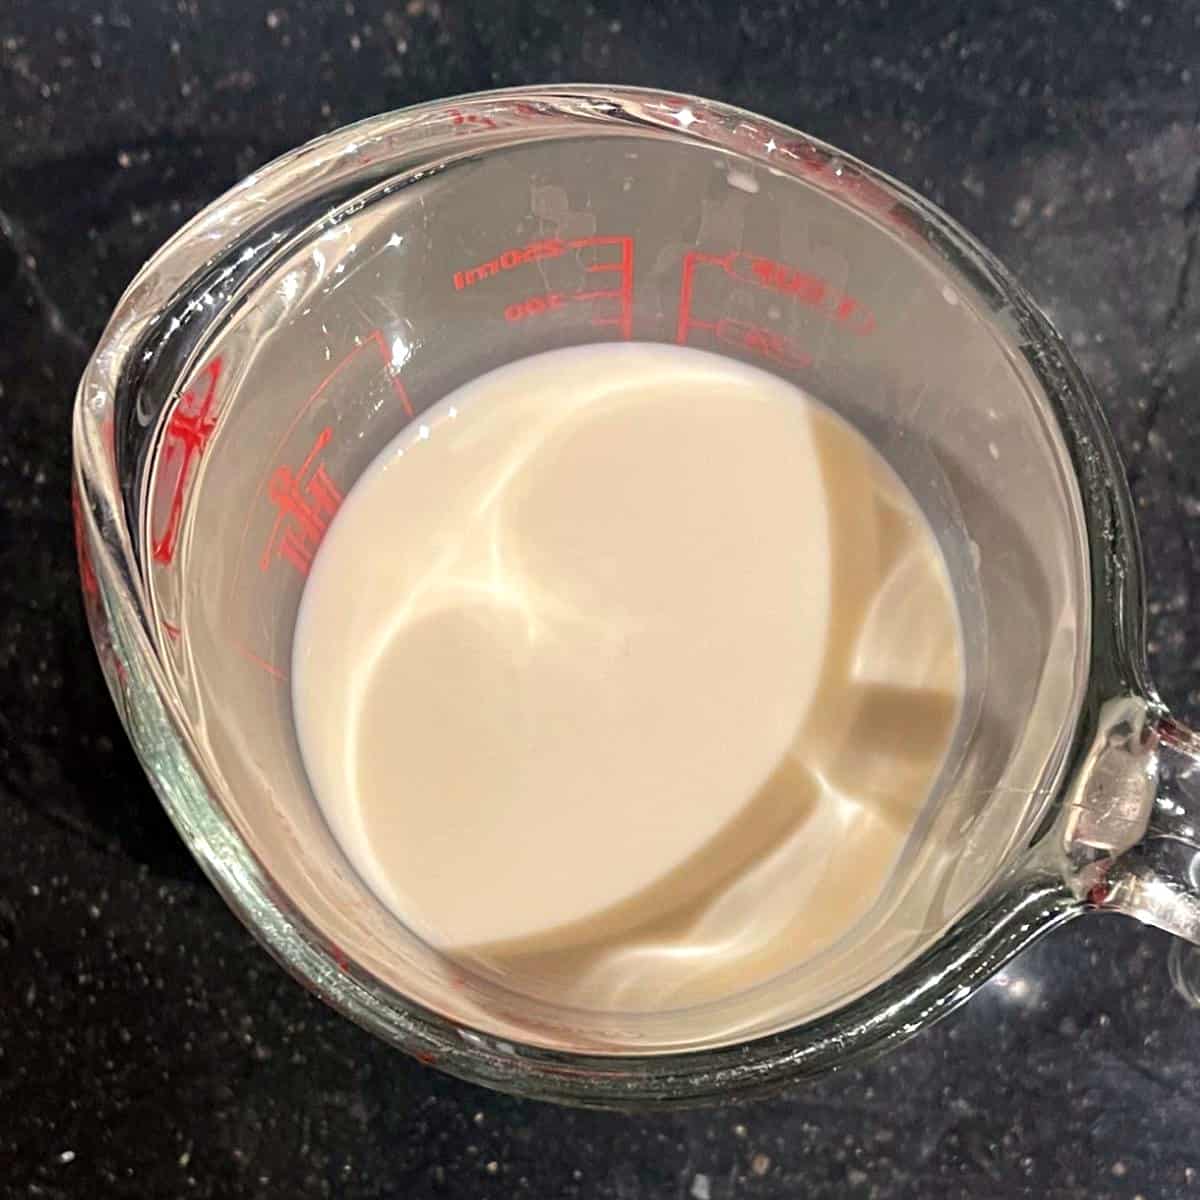 Oat milk mixed with apple cider vinegar in glass measuring cup.